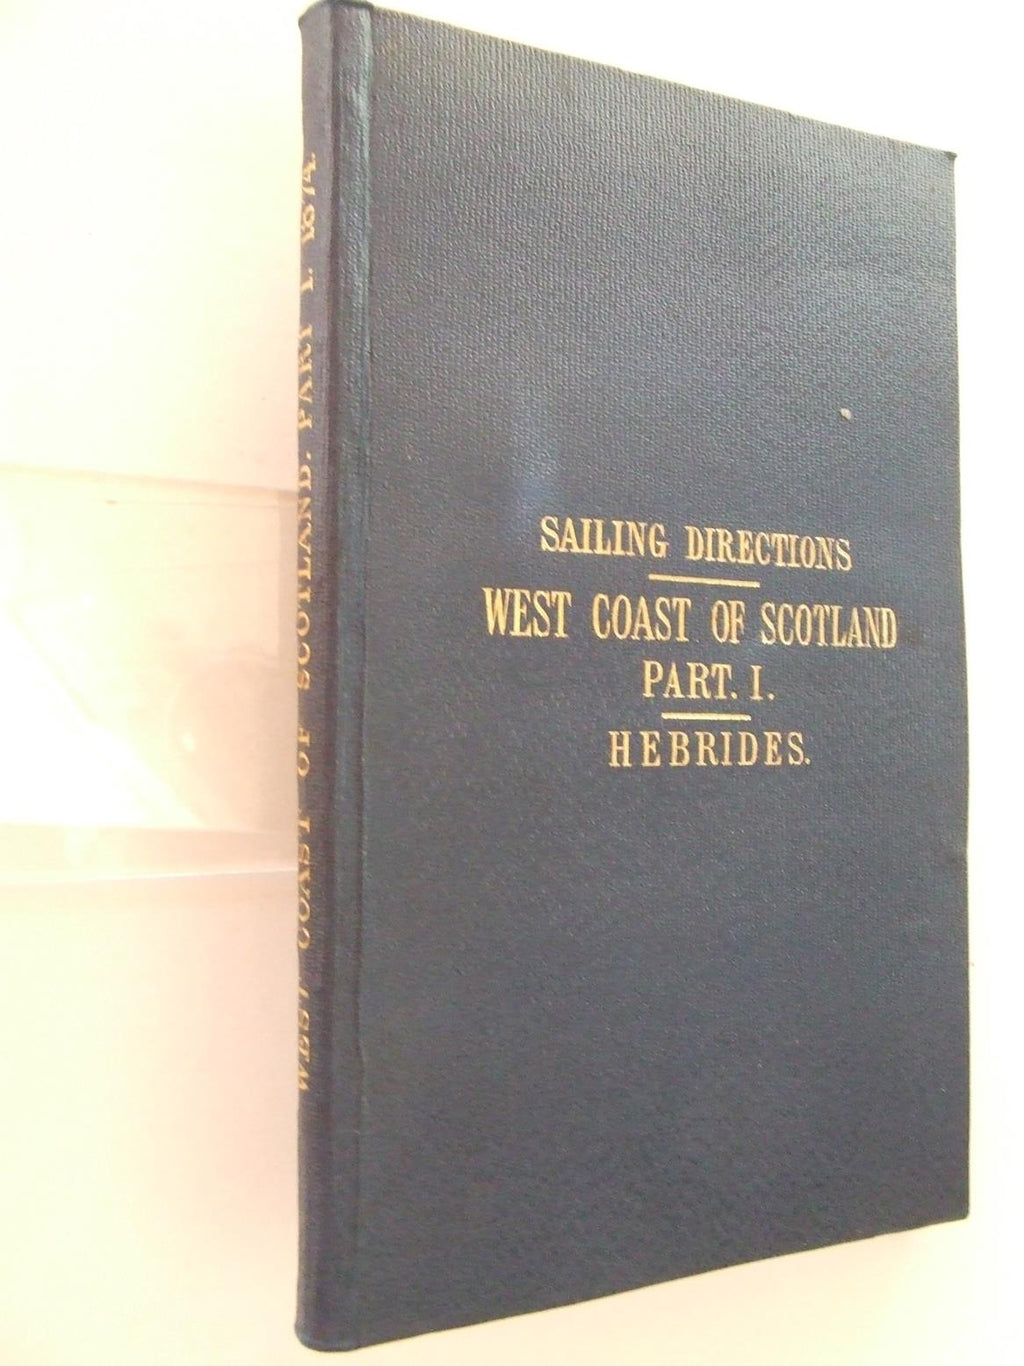 Sailing Directions for the West Coast of Scotland